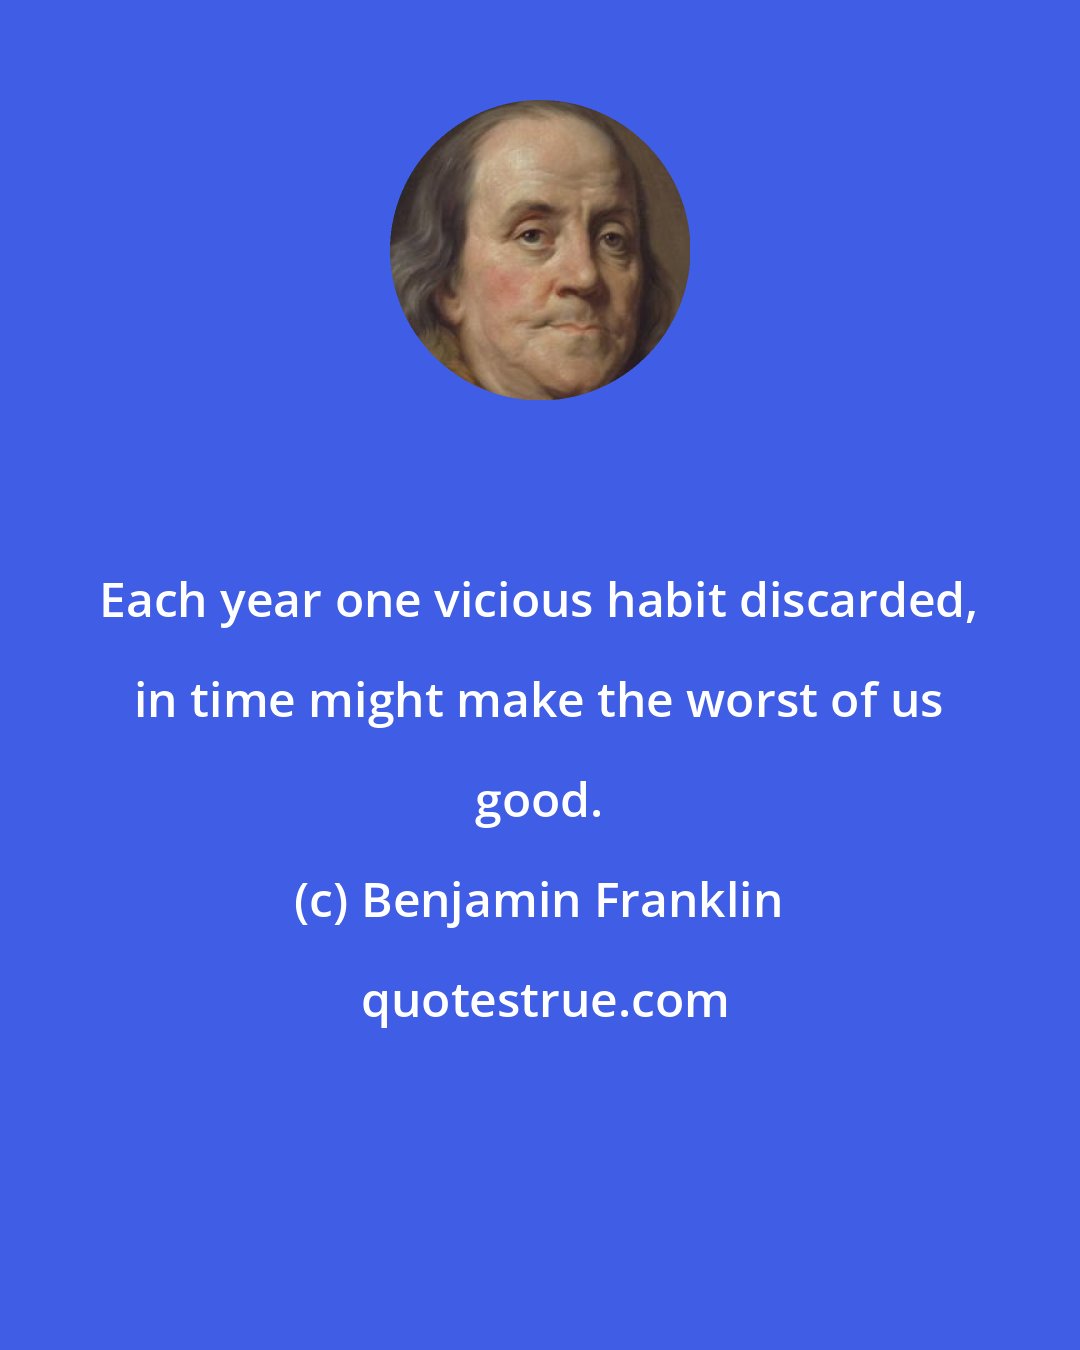 Benjamin Franklin: Each year one vicious habit discarded, in time might make the worst of us good.